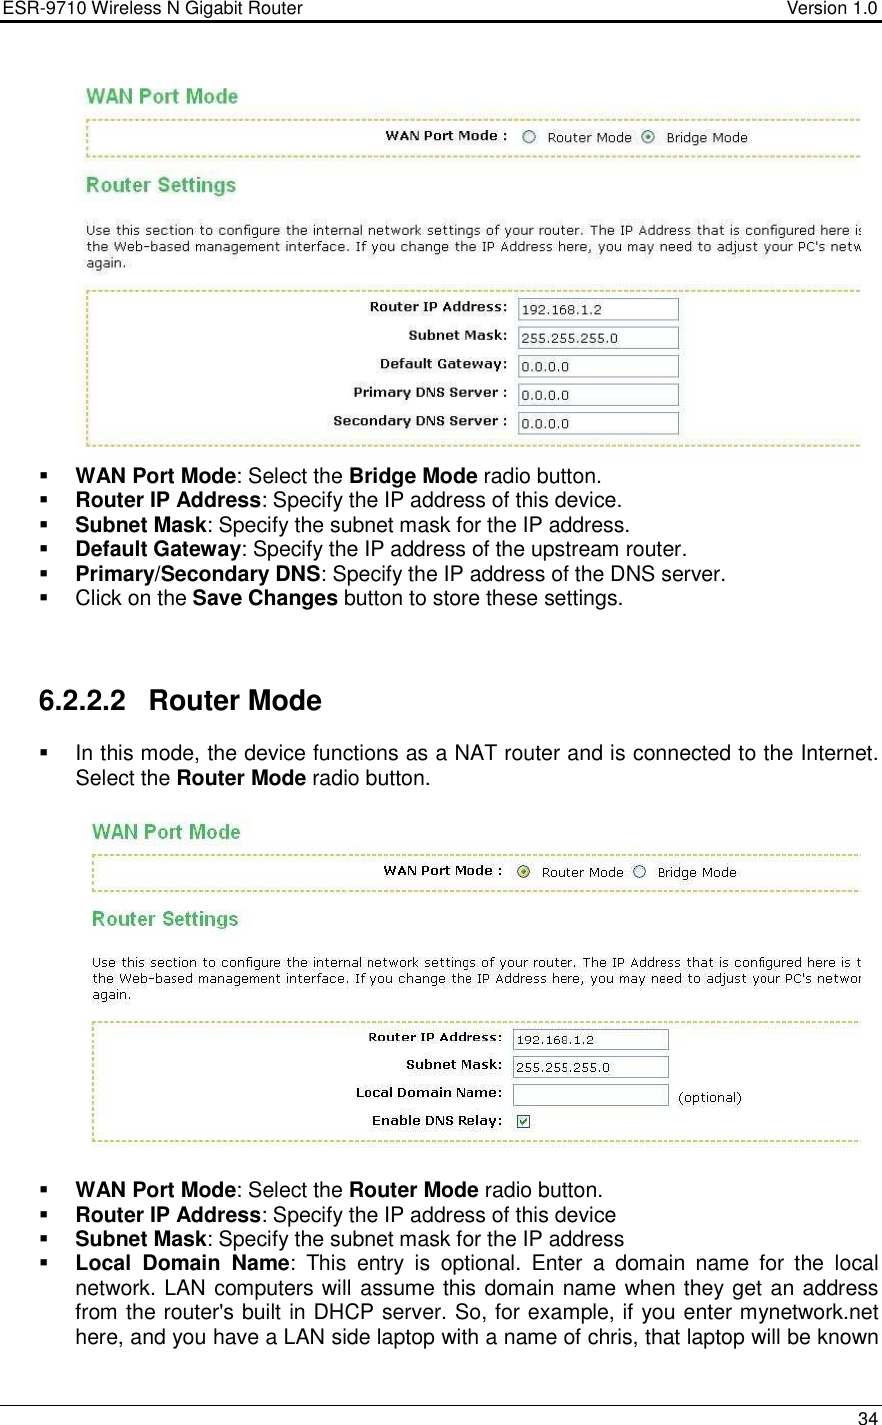 ESR-9710 Wireless N Gigabit Router                                    Version 1.0    34    WAN Port Mode: Select the Bridge Mode radio button.  Router IP Address: Specify the IP address of this device.  Subnet Mask: Specify the subnet mask for the IP address.  Default Gateway: Specify the IP address of the upstream router.  Primary/Secondary DNS: Specify the IP address of the DNS server.    Click on the Save Changes button to store these settings.     6.2.2.2  Router Mode   In this mode, the device functions as a NAT router and is connected to the Internet. Select the Router Mode radio button.      WAN Port Mode: Select the Router Mode radio button.  Router IP Address: Specify the IP address of this device  Subnet Mask: Specify the subnet mask for the IP address  Local  Domain  Name:  This  entry  is  optional.  Enter  a  domain  name  for  the  local network. LAN computers will assume this domain name when they get an address from the router&apos;s built in DHCP server. So, for example, if you enter mynetwork.net here, and you have a LAN side laptop with a name of chris, that laptop will be known 